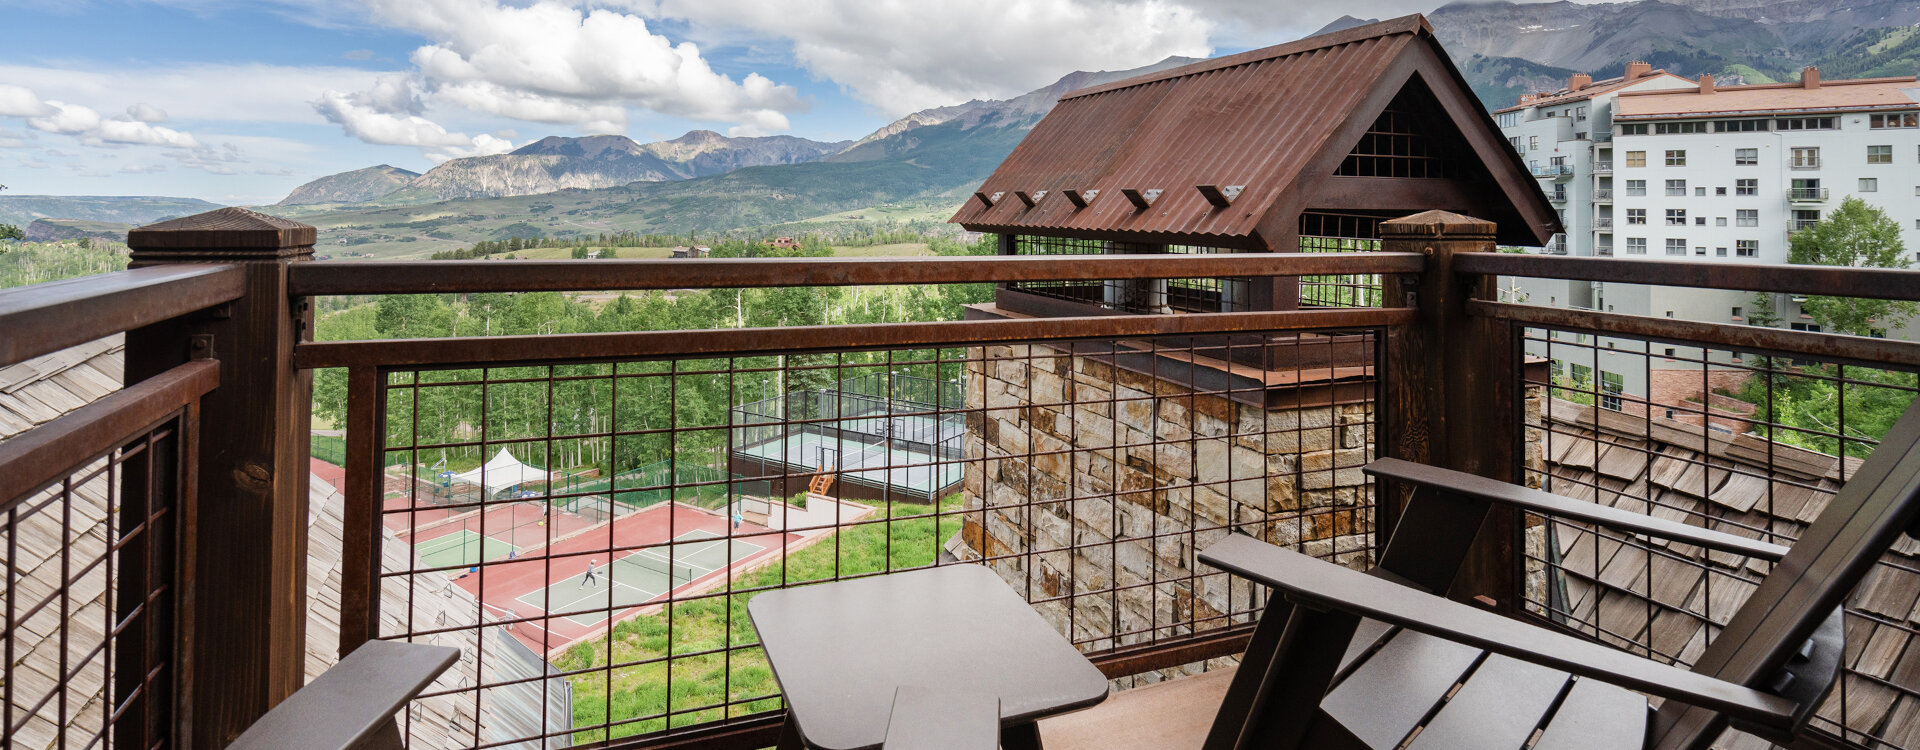 3-telluride-aspens-at-courcheval-deck-view